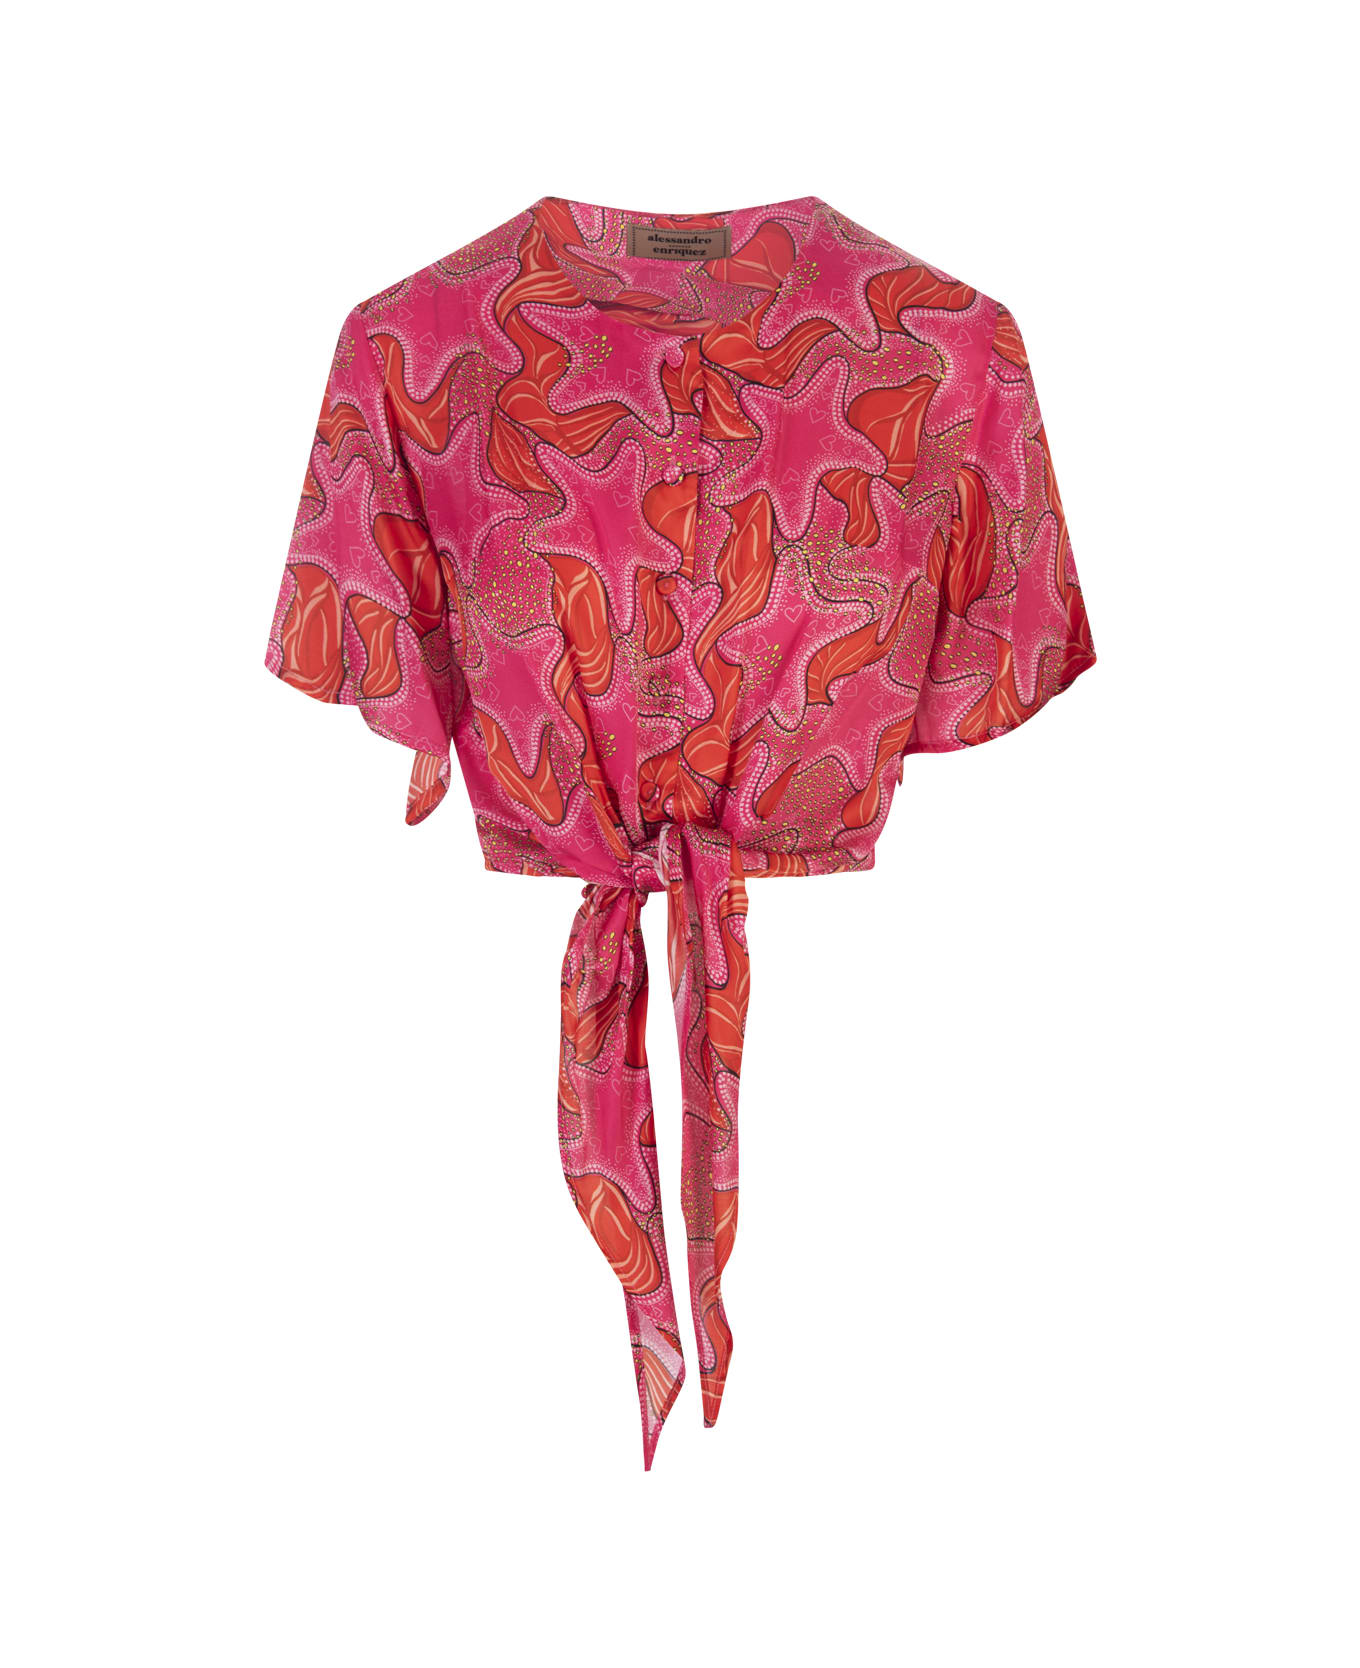 Alessandro Enriquez Crop Shirt With Knot And Star Print - Pink